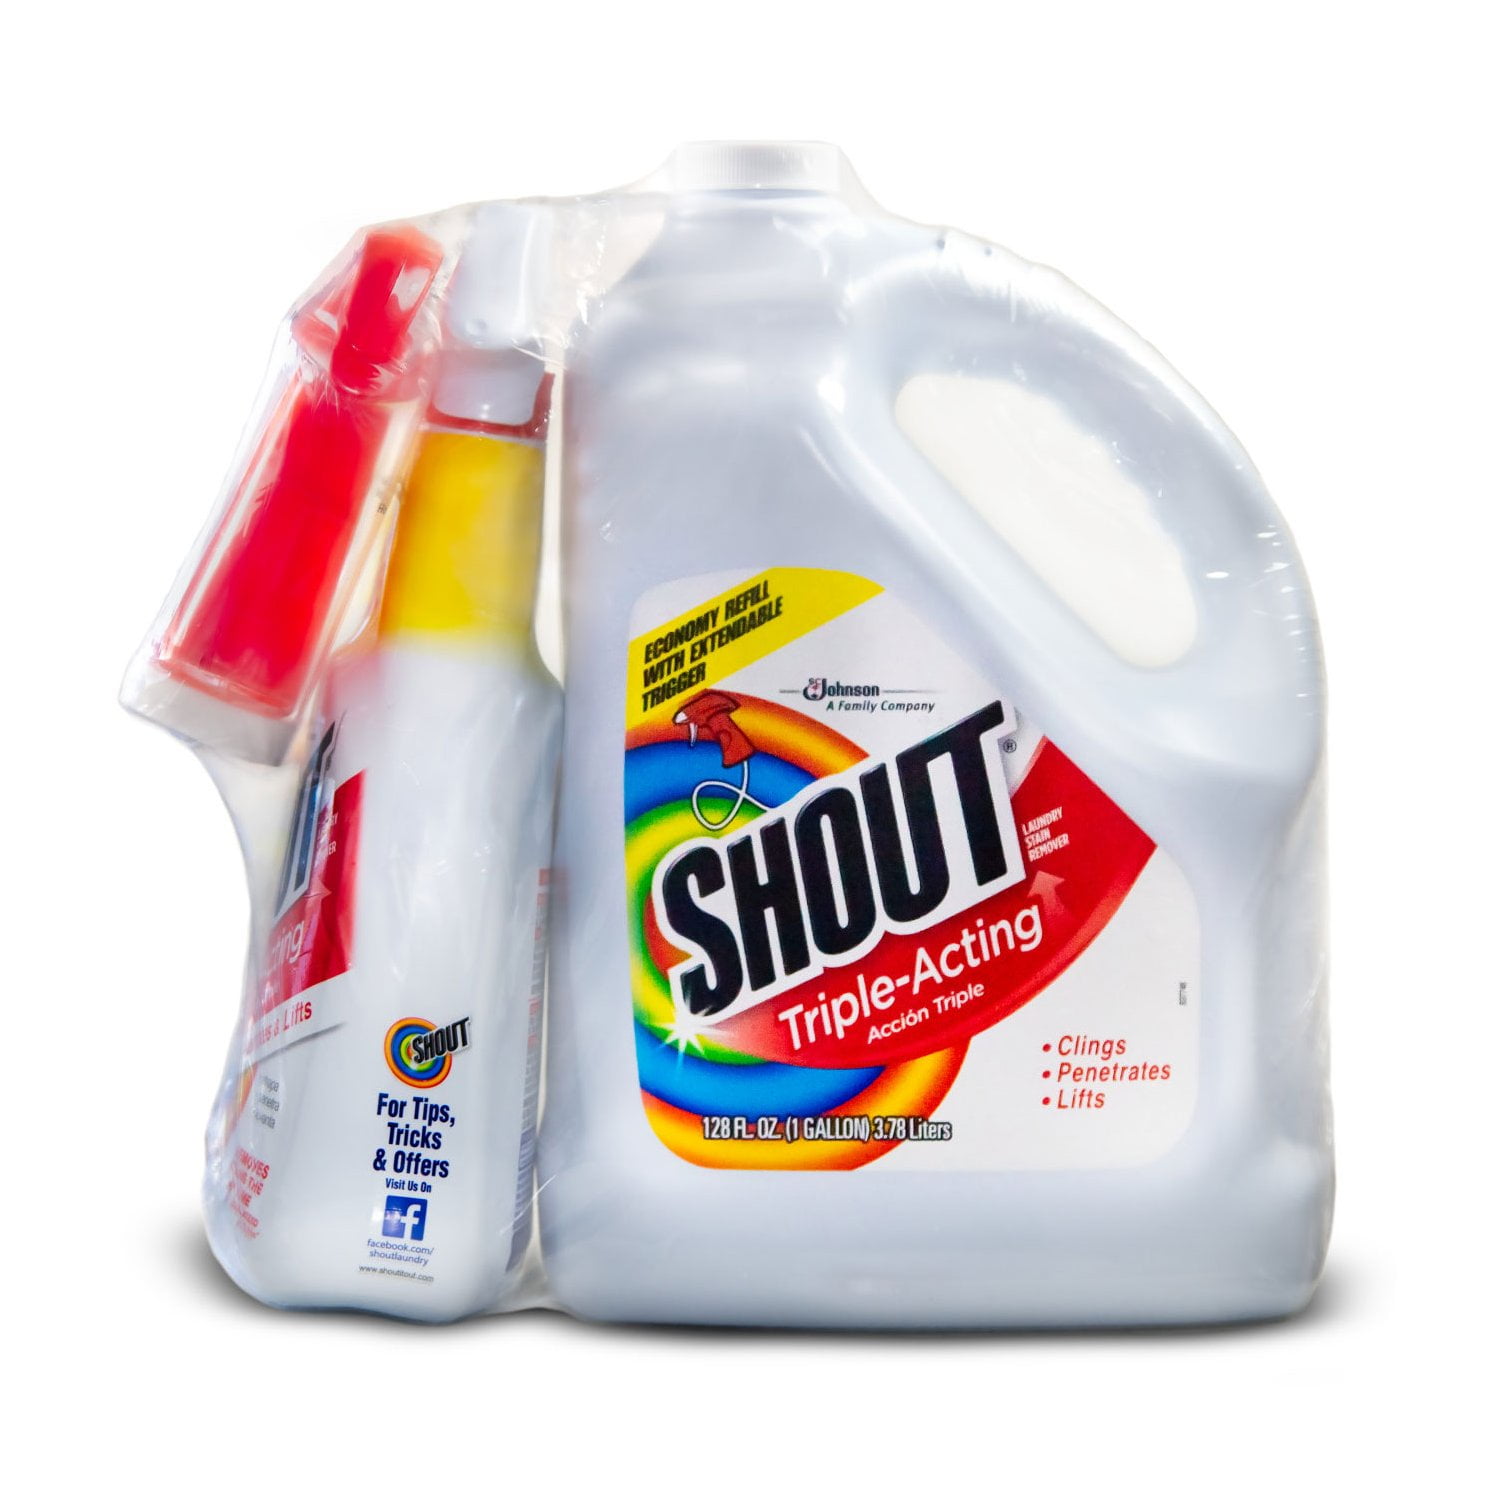 Shout Value Refill Triple-Acting Laundry Stain Remover 60 oz — Gong's Market